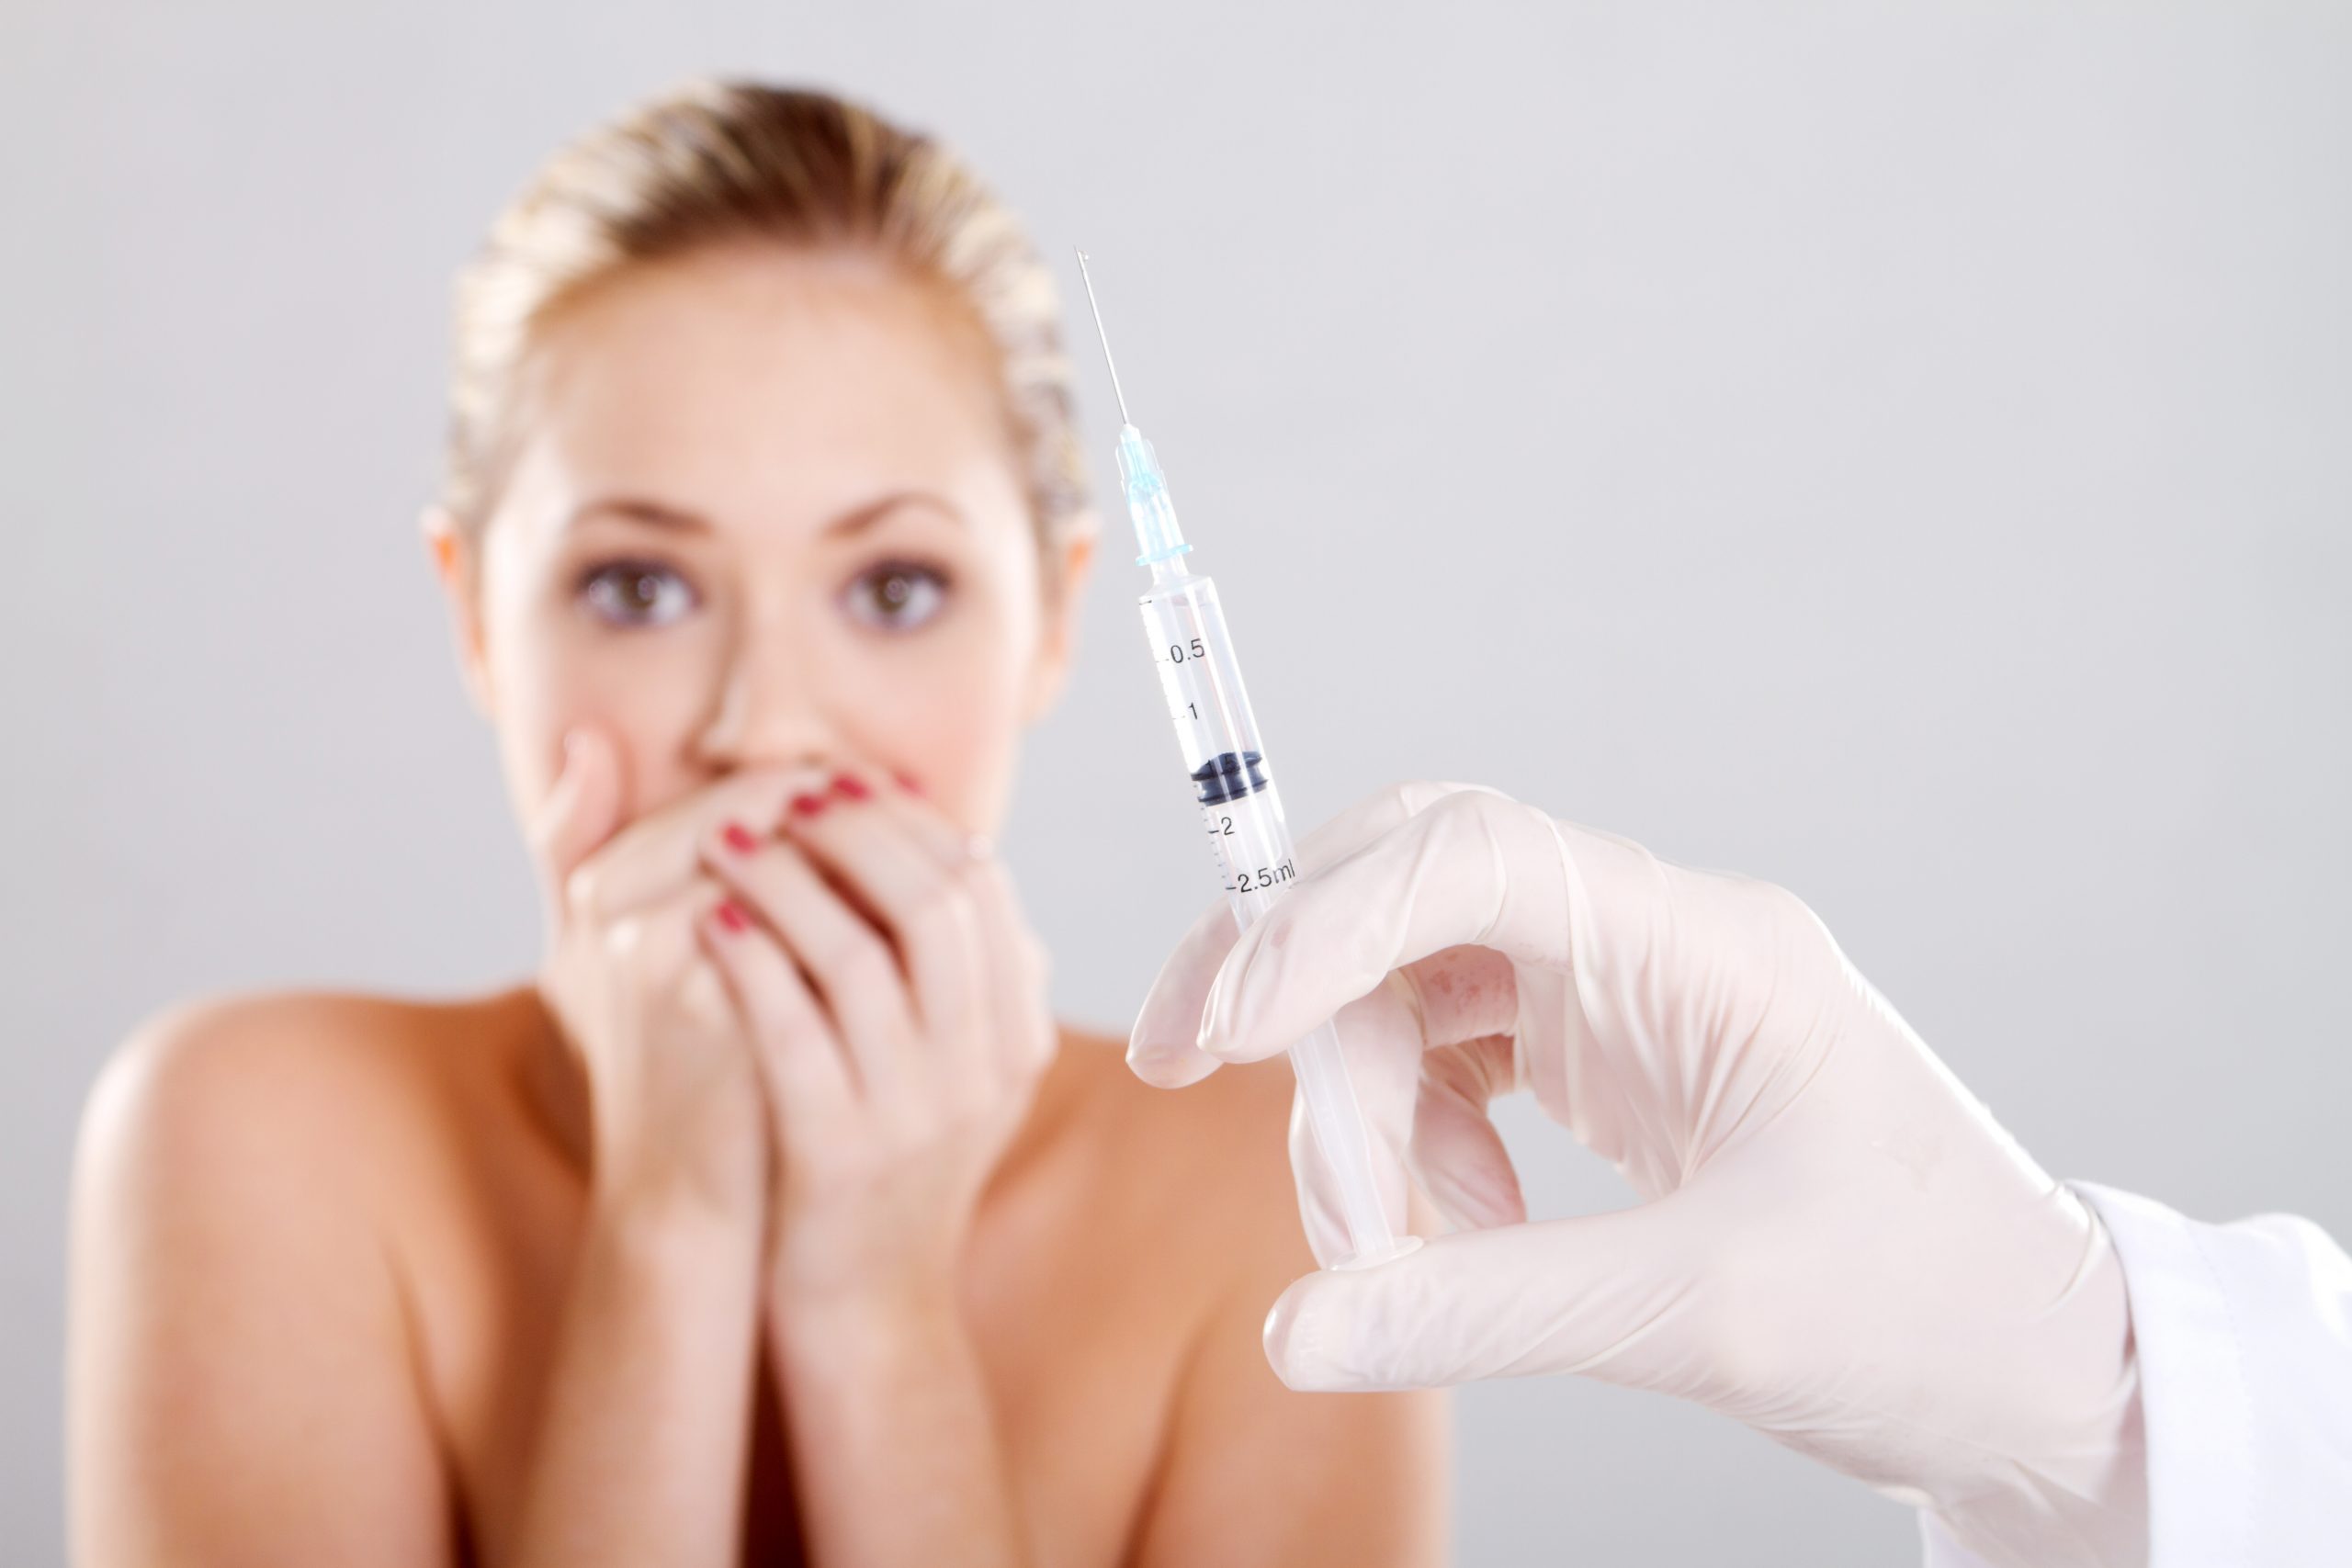 Egg donation medication injections